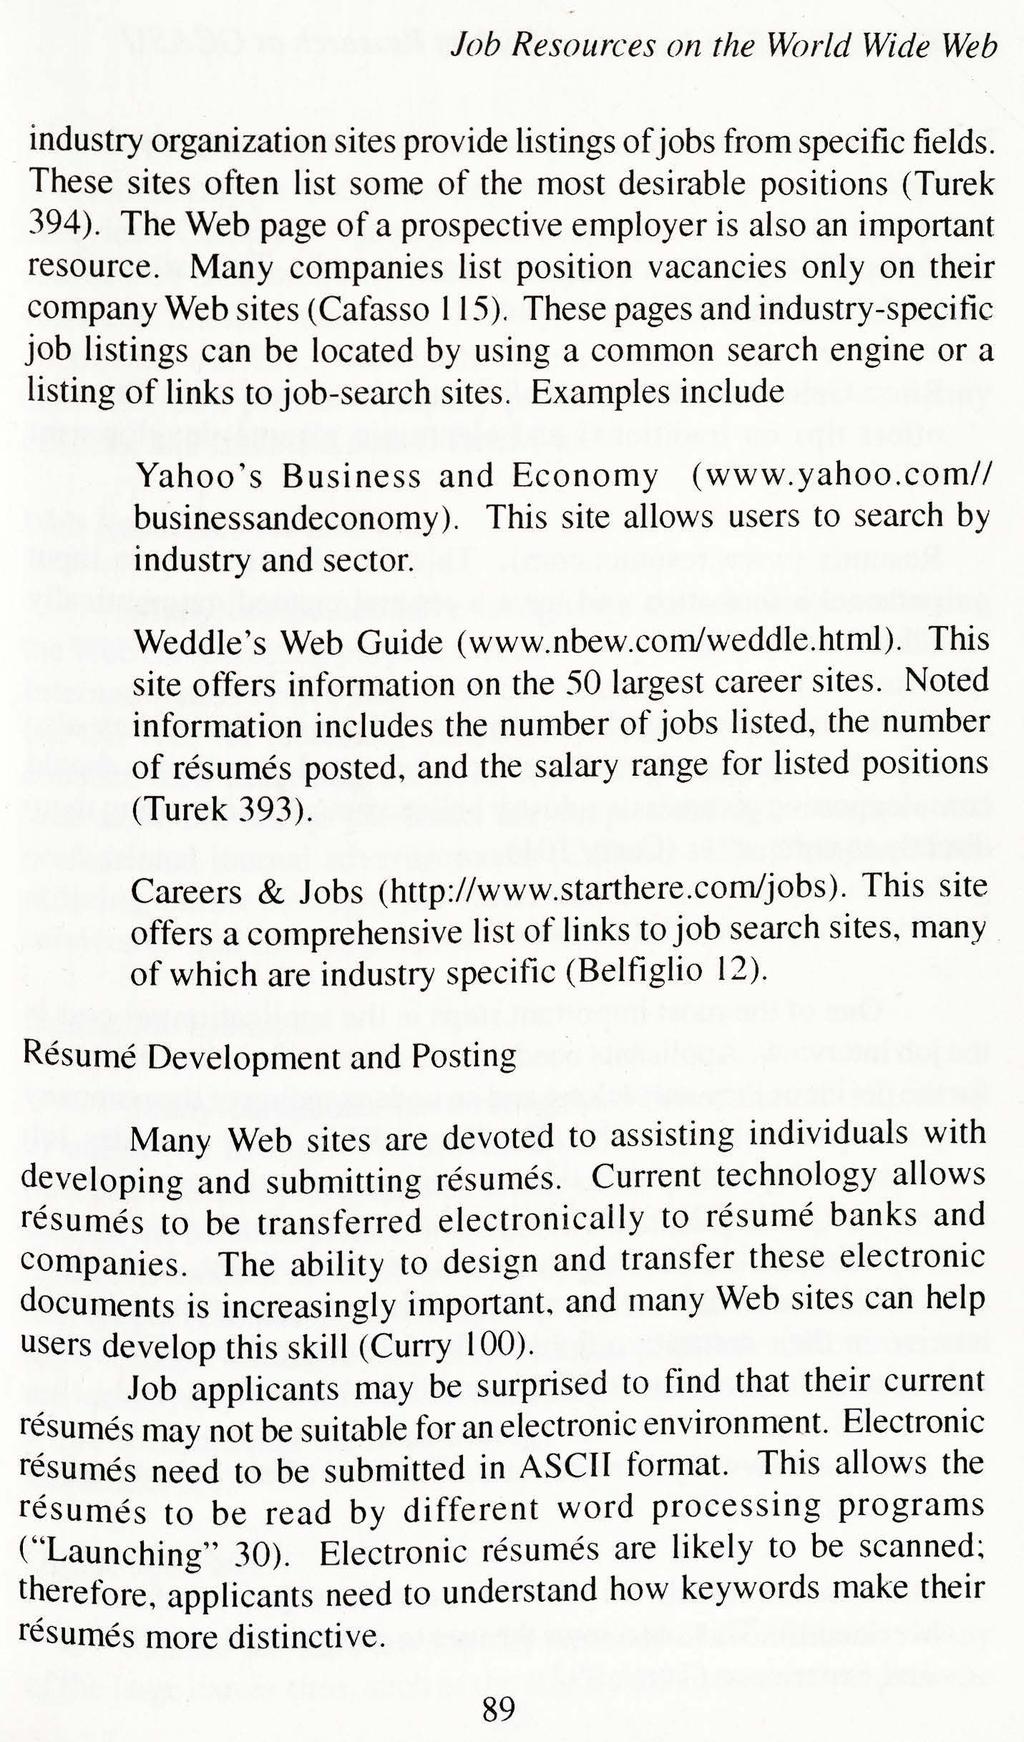 Job Resources on the World Wide Web industry organization sites provide listings of jobs from specific fields. These sites often list some of the most desirable positions (Turek 394).